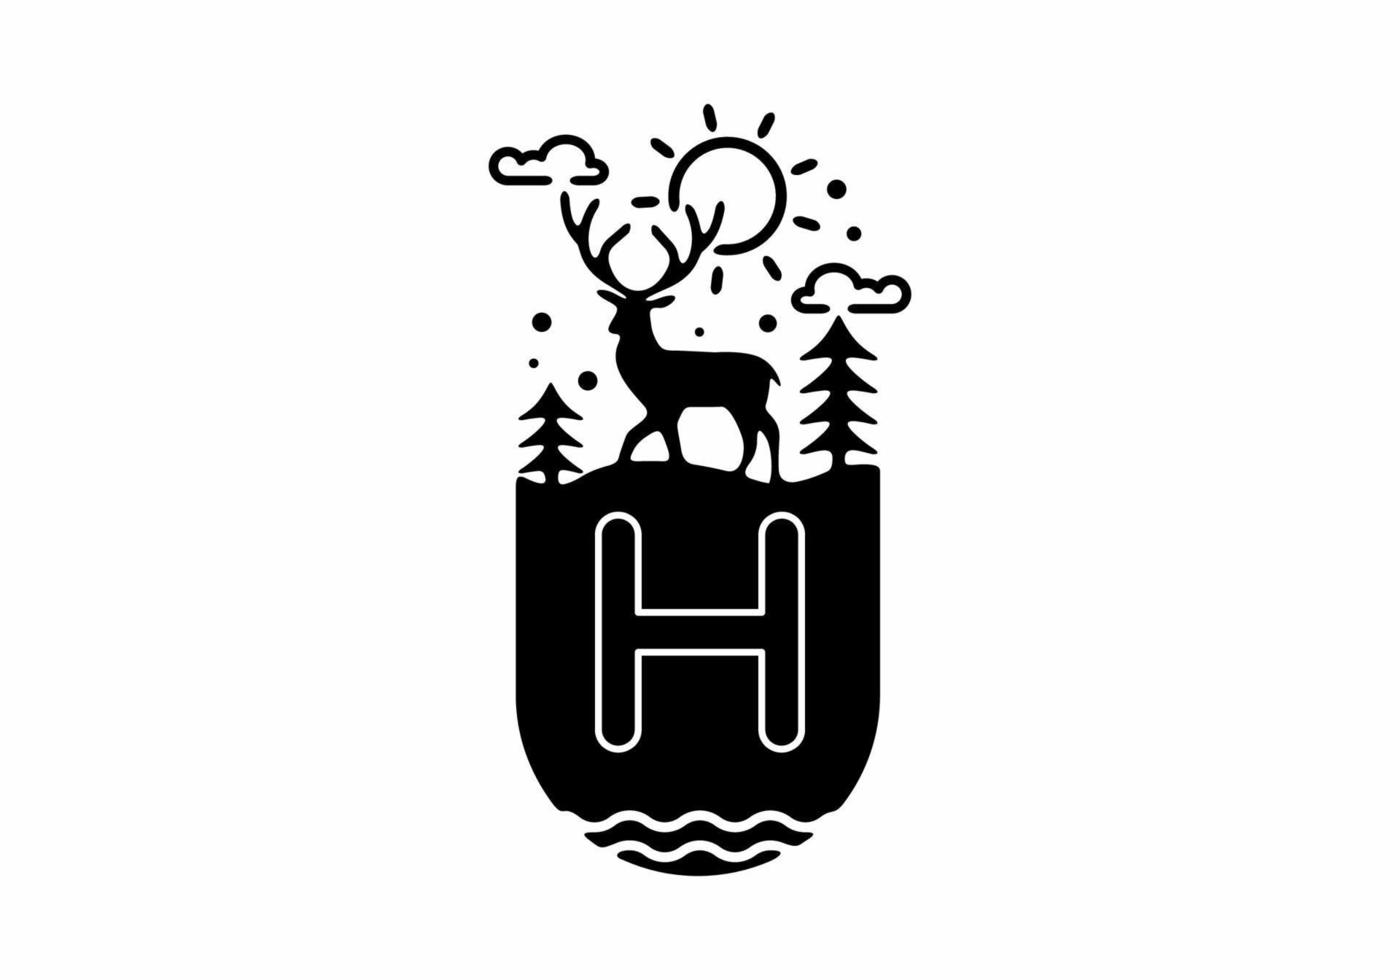 Black line art illustration of deer badge with H initial name in the middle vector